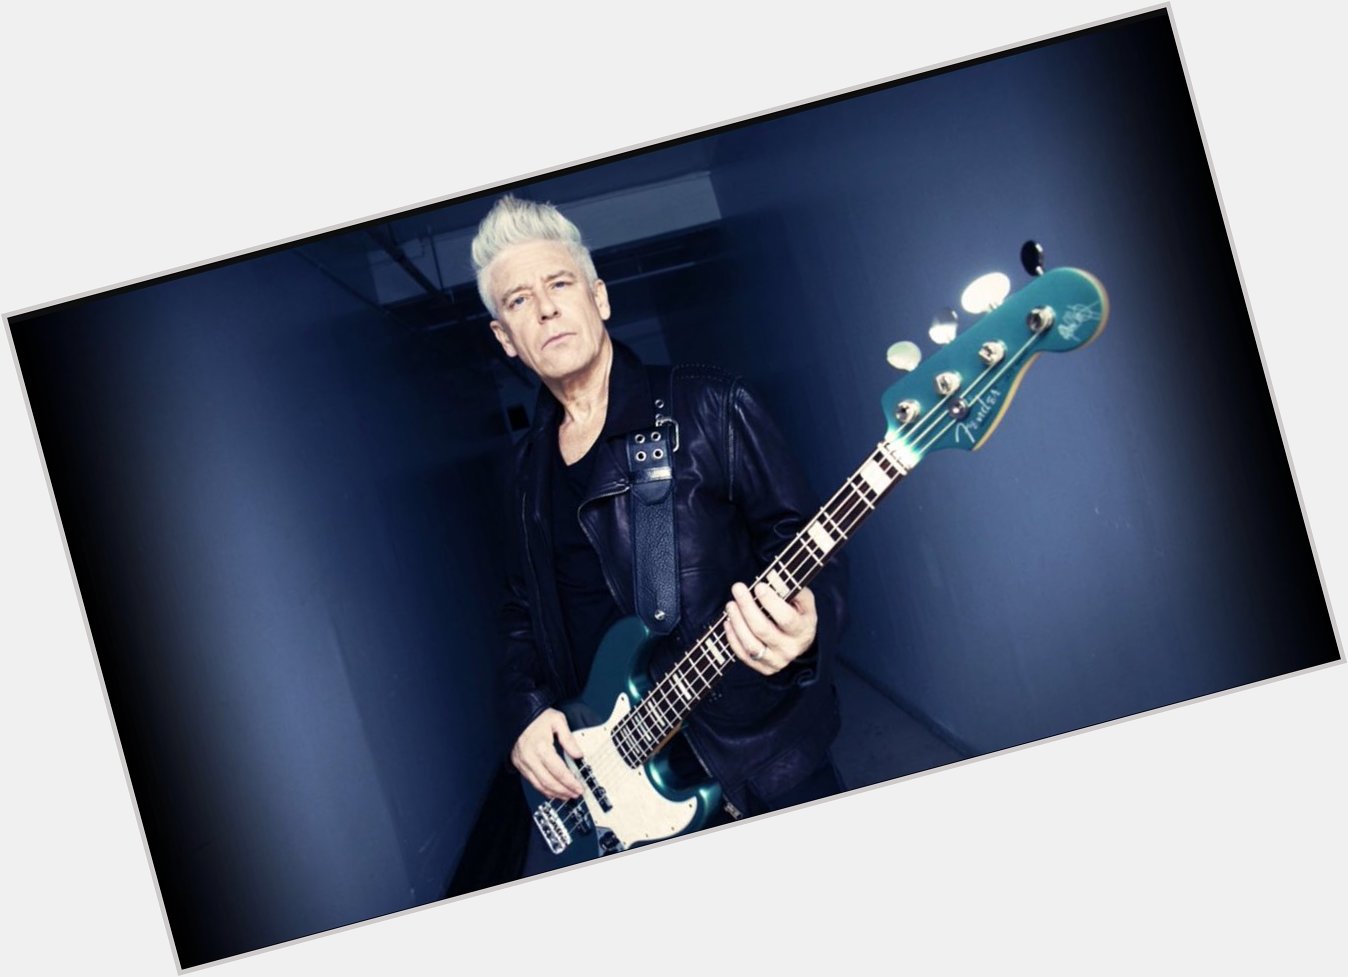 Happy birthday to bassist Adam Clayton - can\t wait for the summer tour shows 